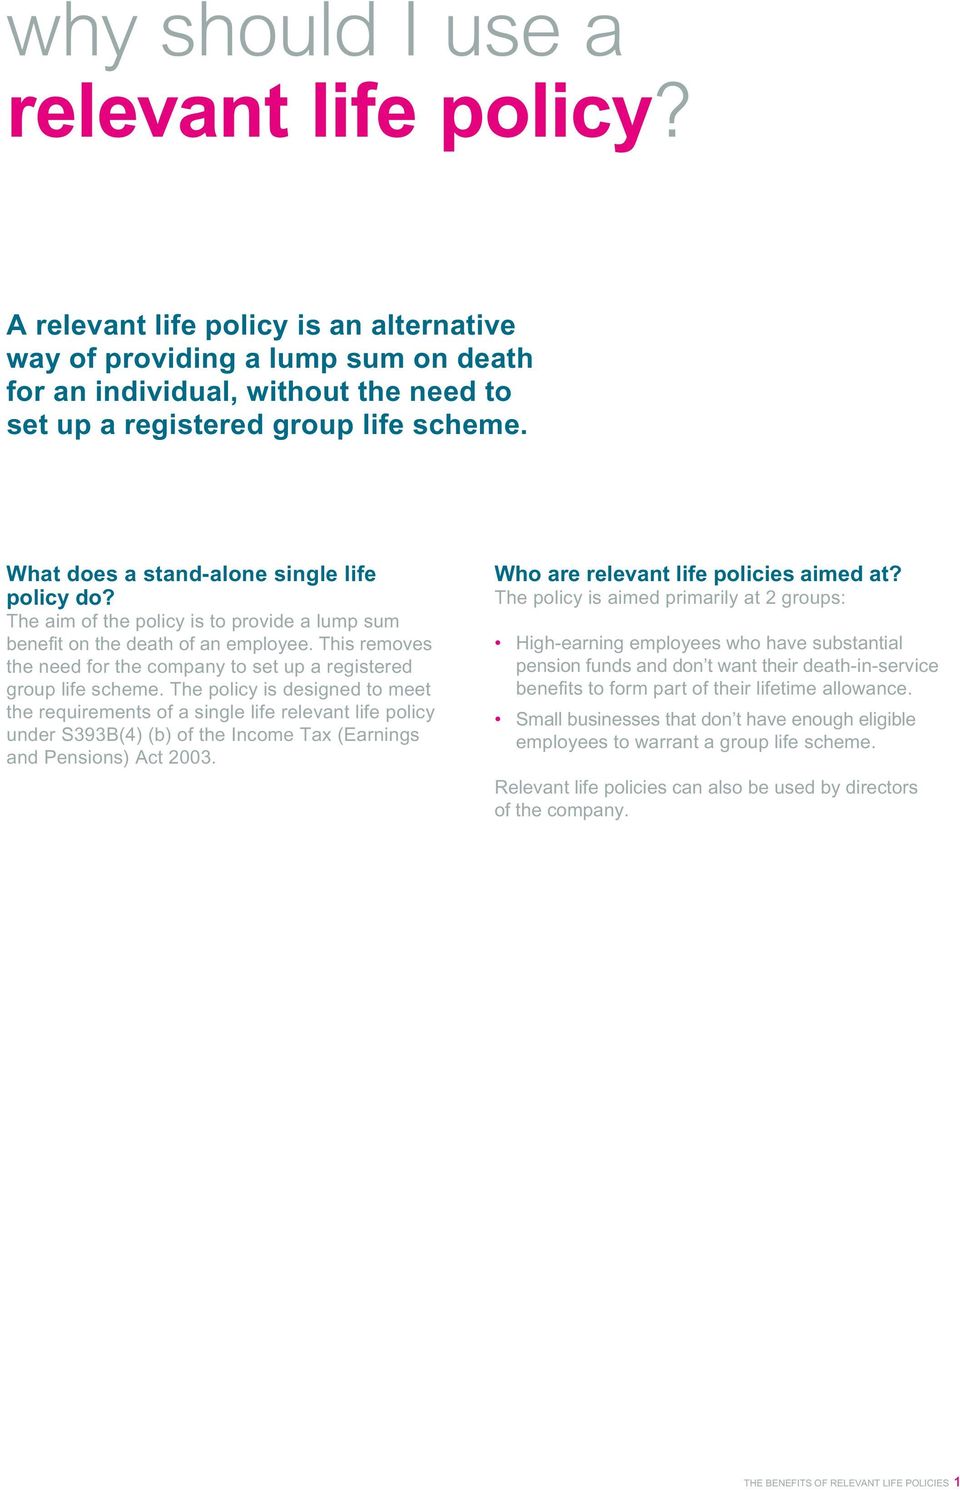 This removes the need for the company to set up a registered group life scheme.